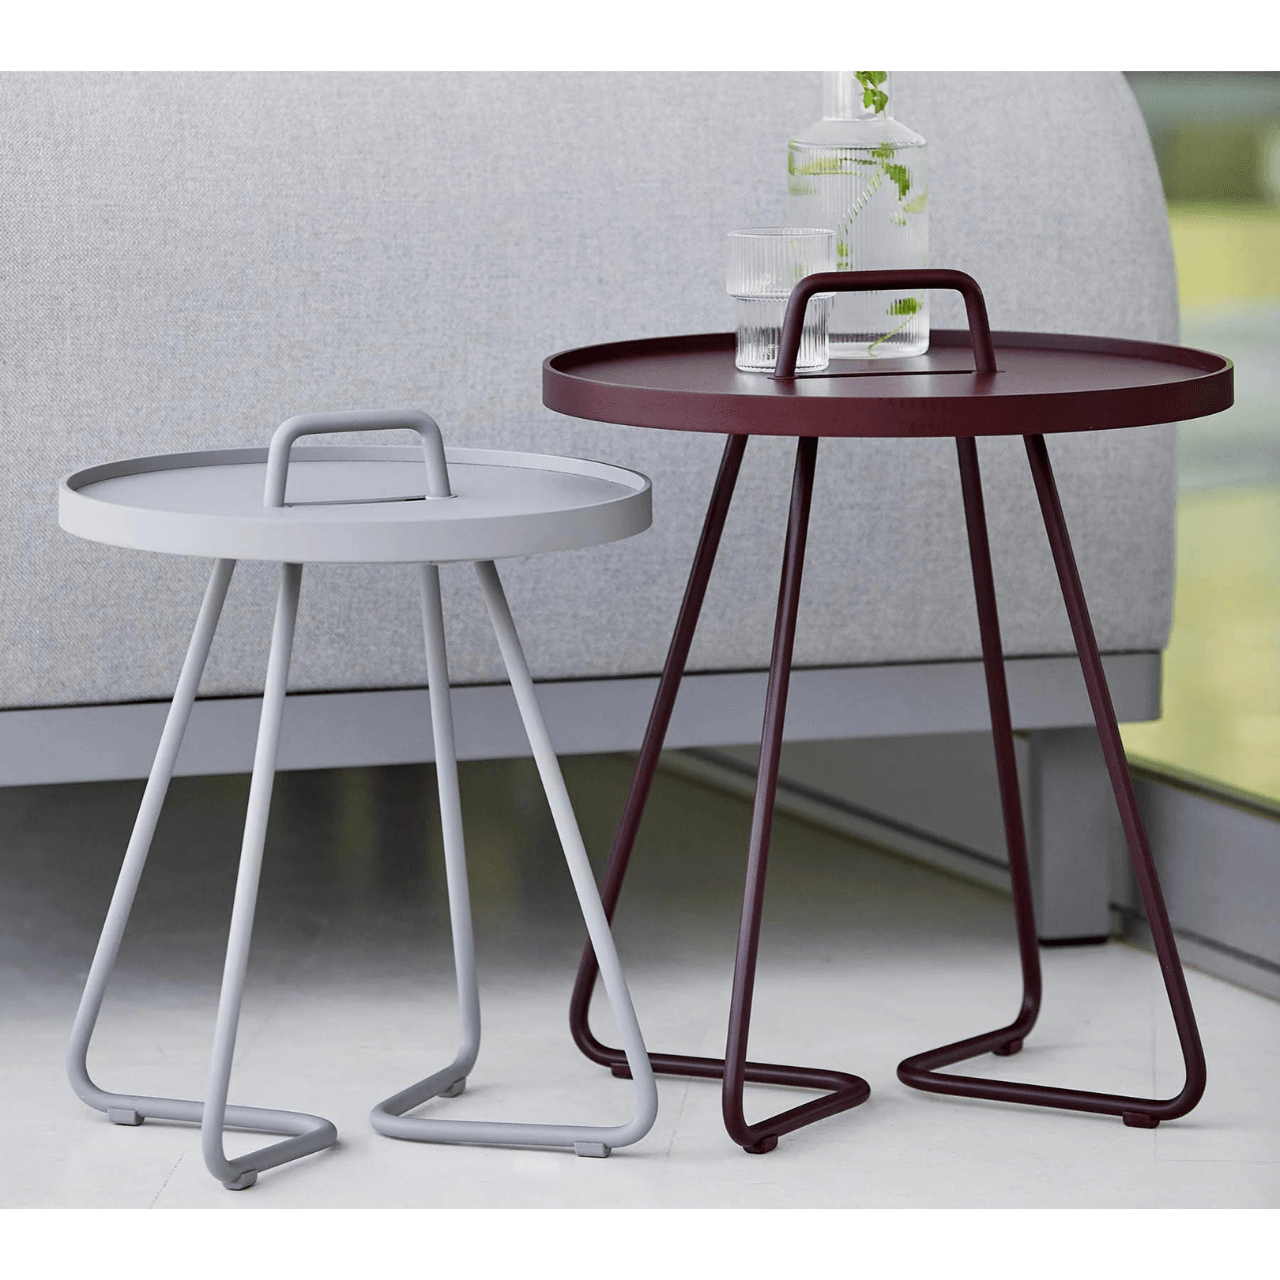 Boxhill's On-The-Move light grey and maroon outdoor round side table with glass of water and a bottle container on it